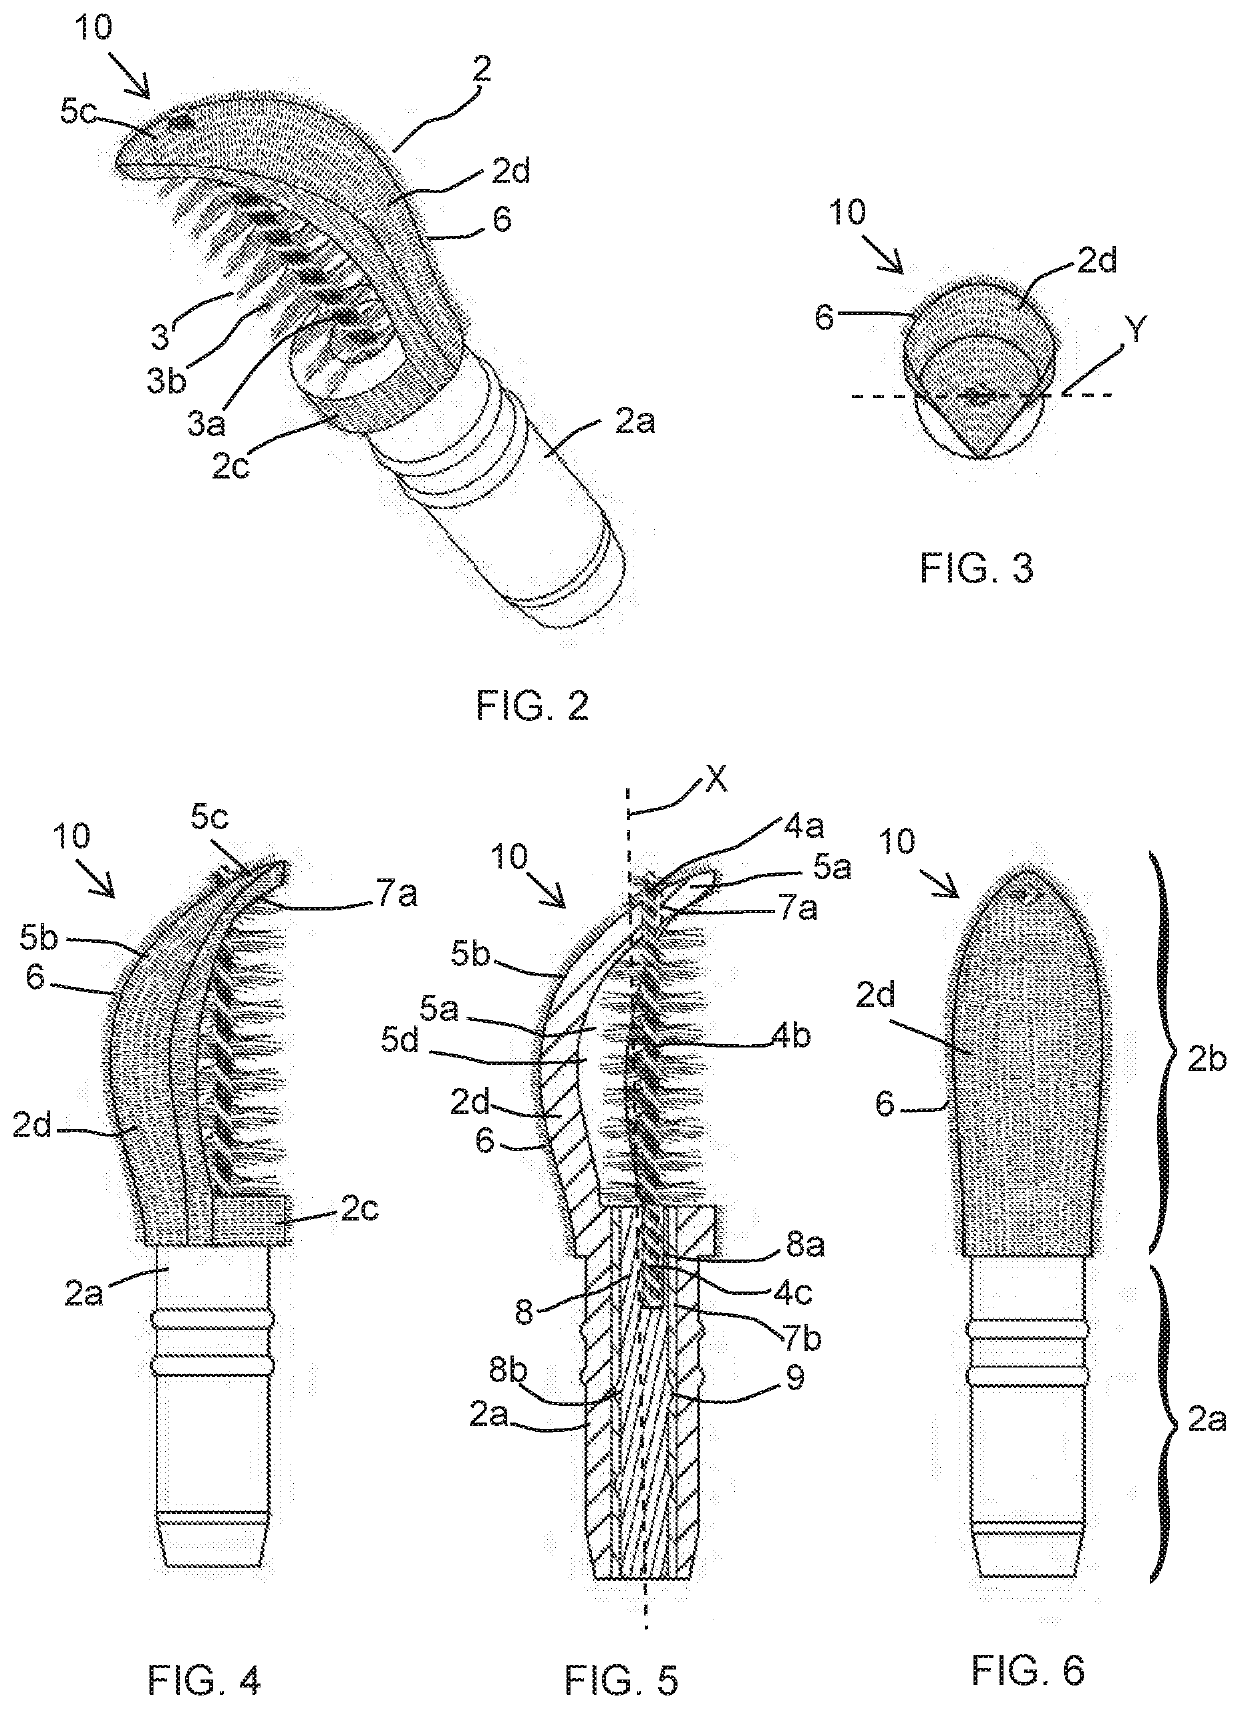 Cosmetic applicator with separate brush and molded applicator structures